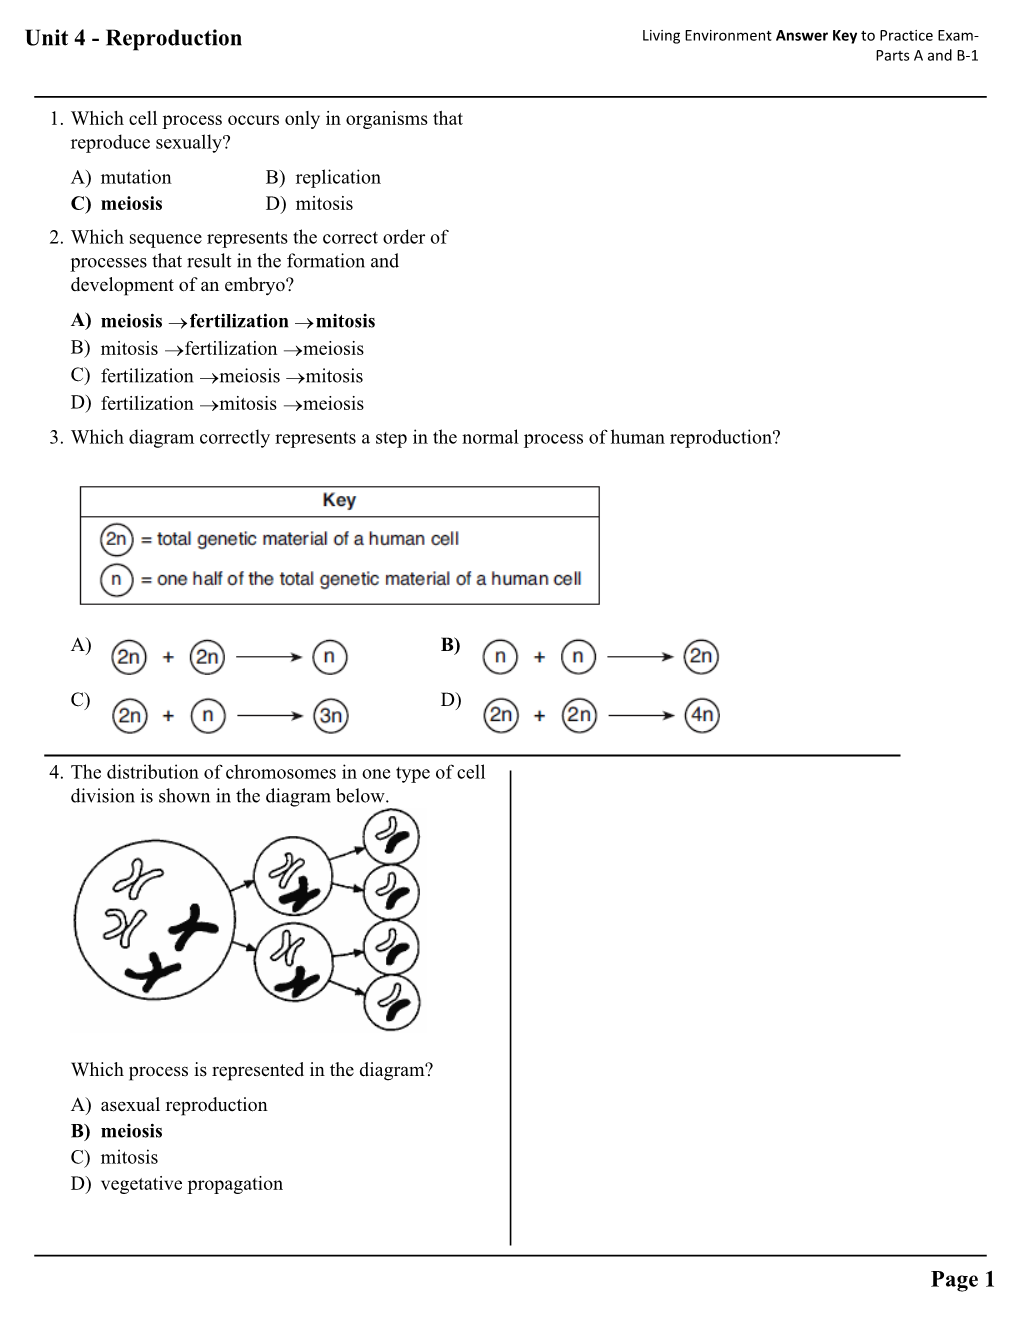 Unit 4 - Reproduction Living Environment Answer Key to Practice Exam